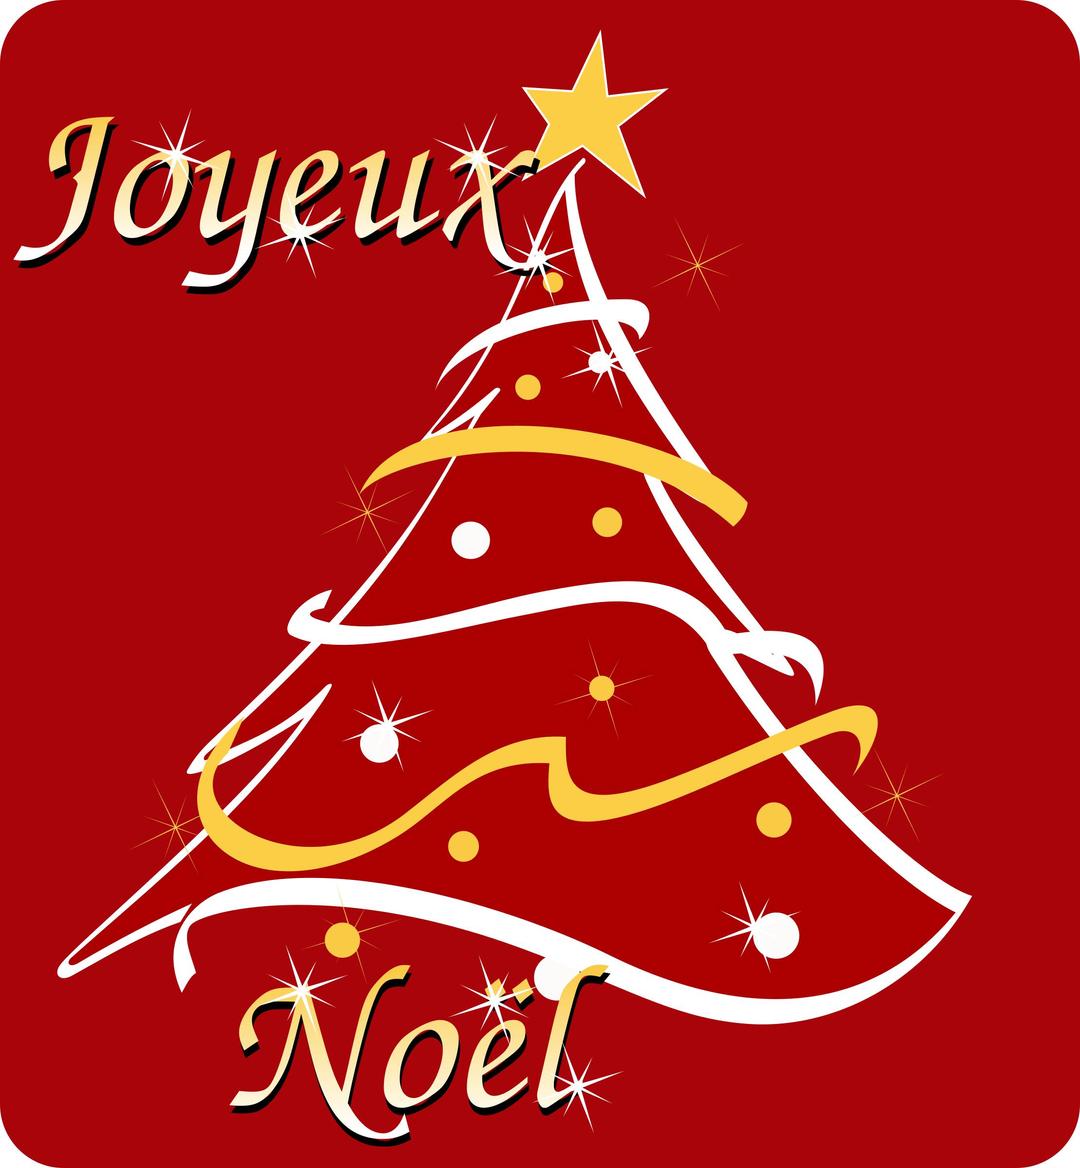 Joyeux Noel - Merry Christmas in french png transparent